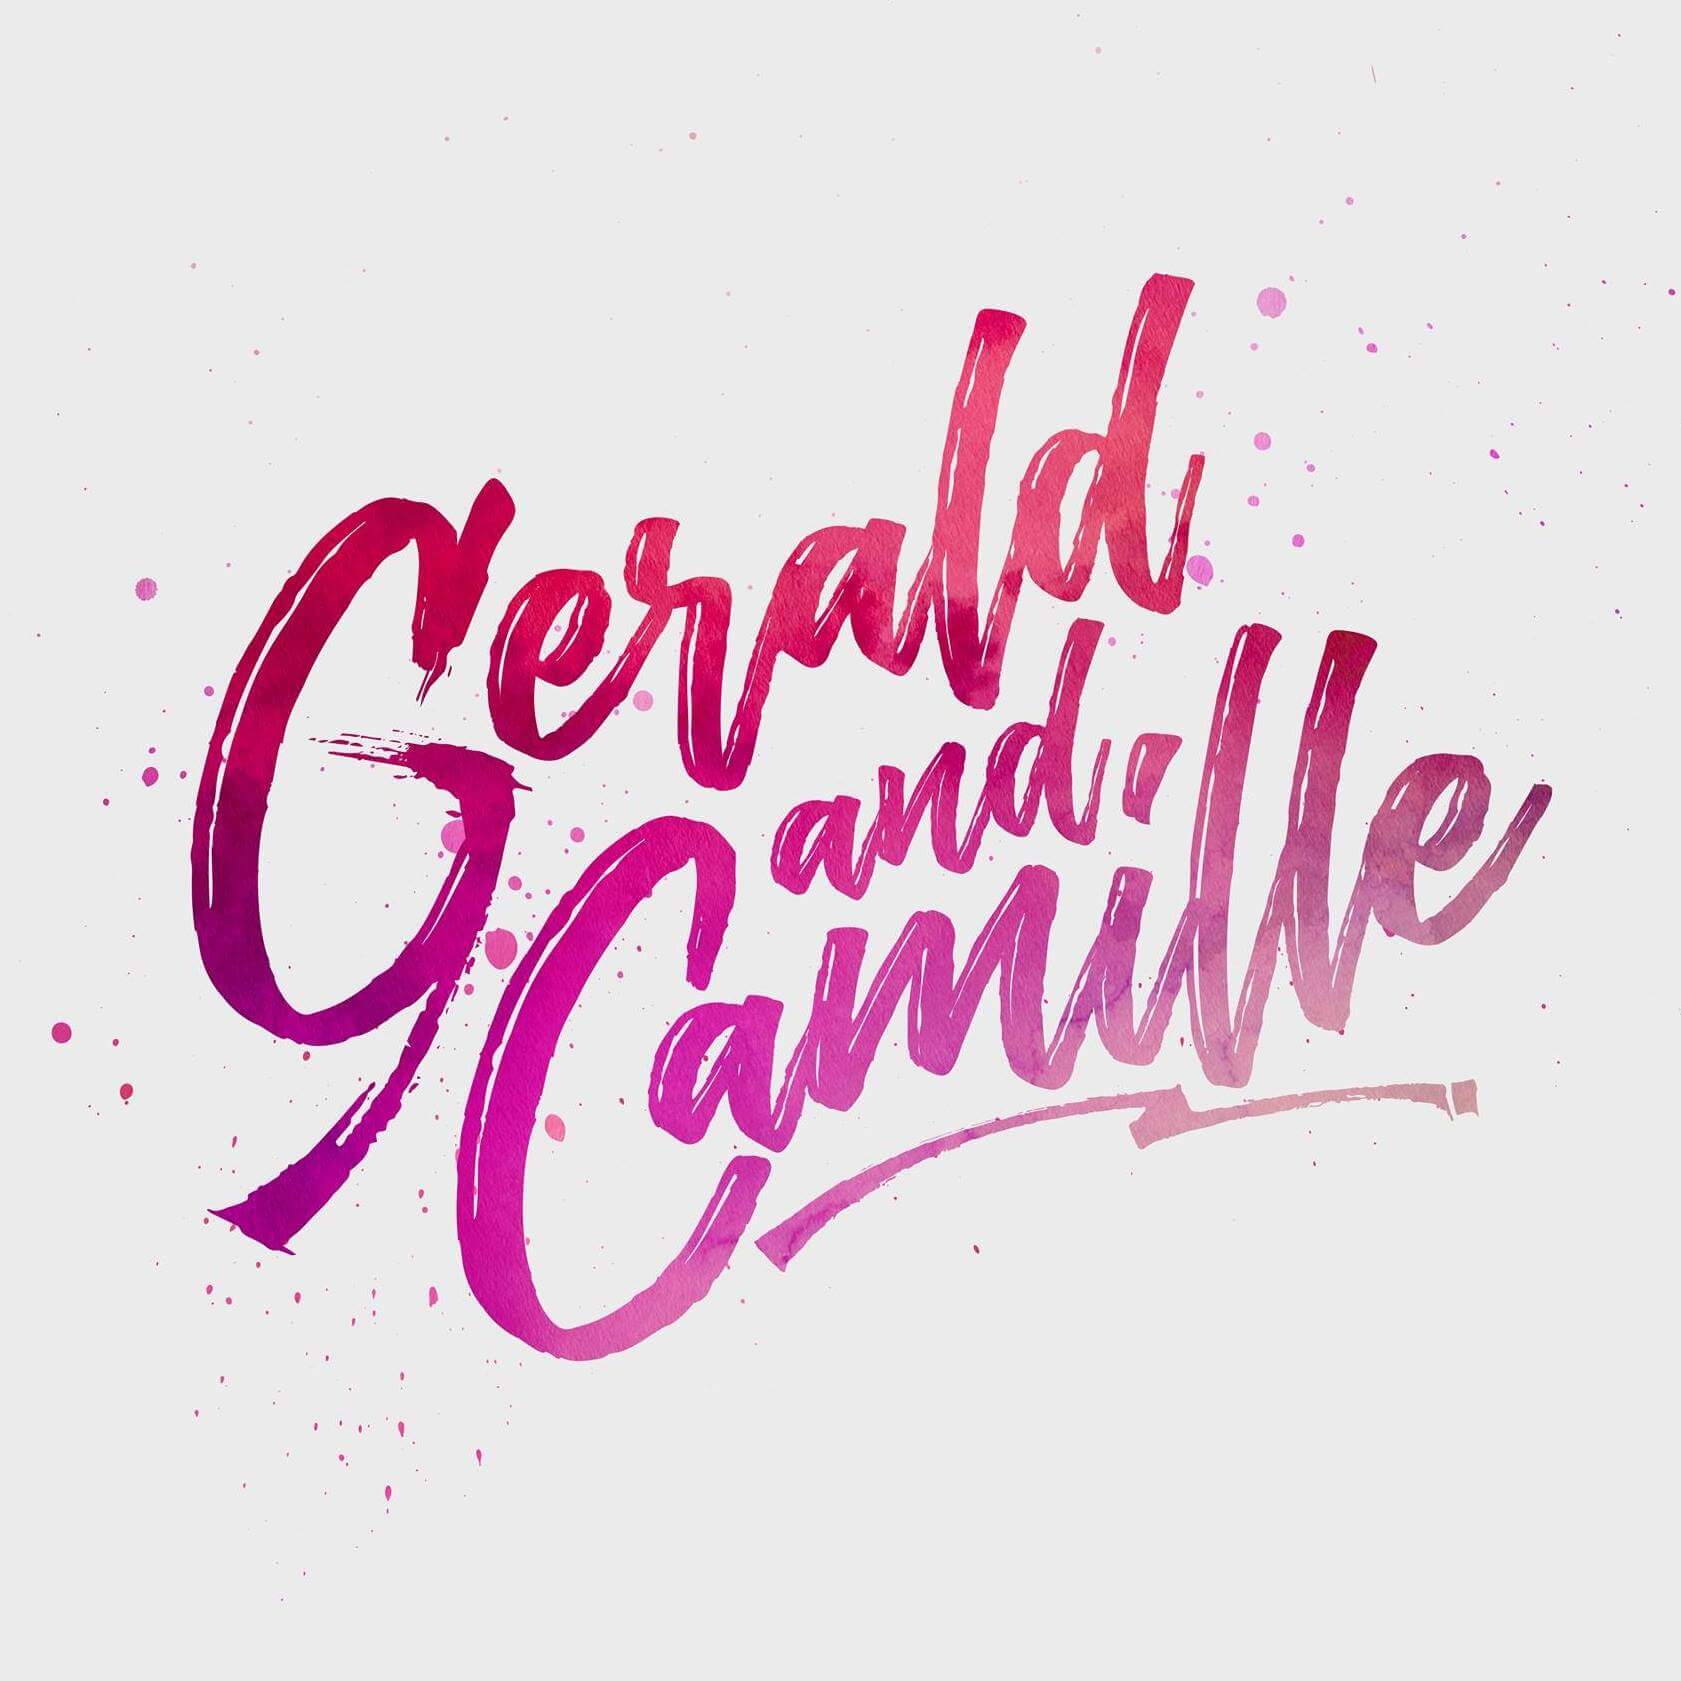 Gerald and Camille